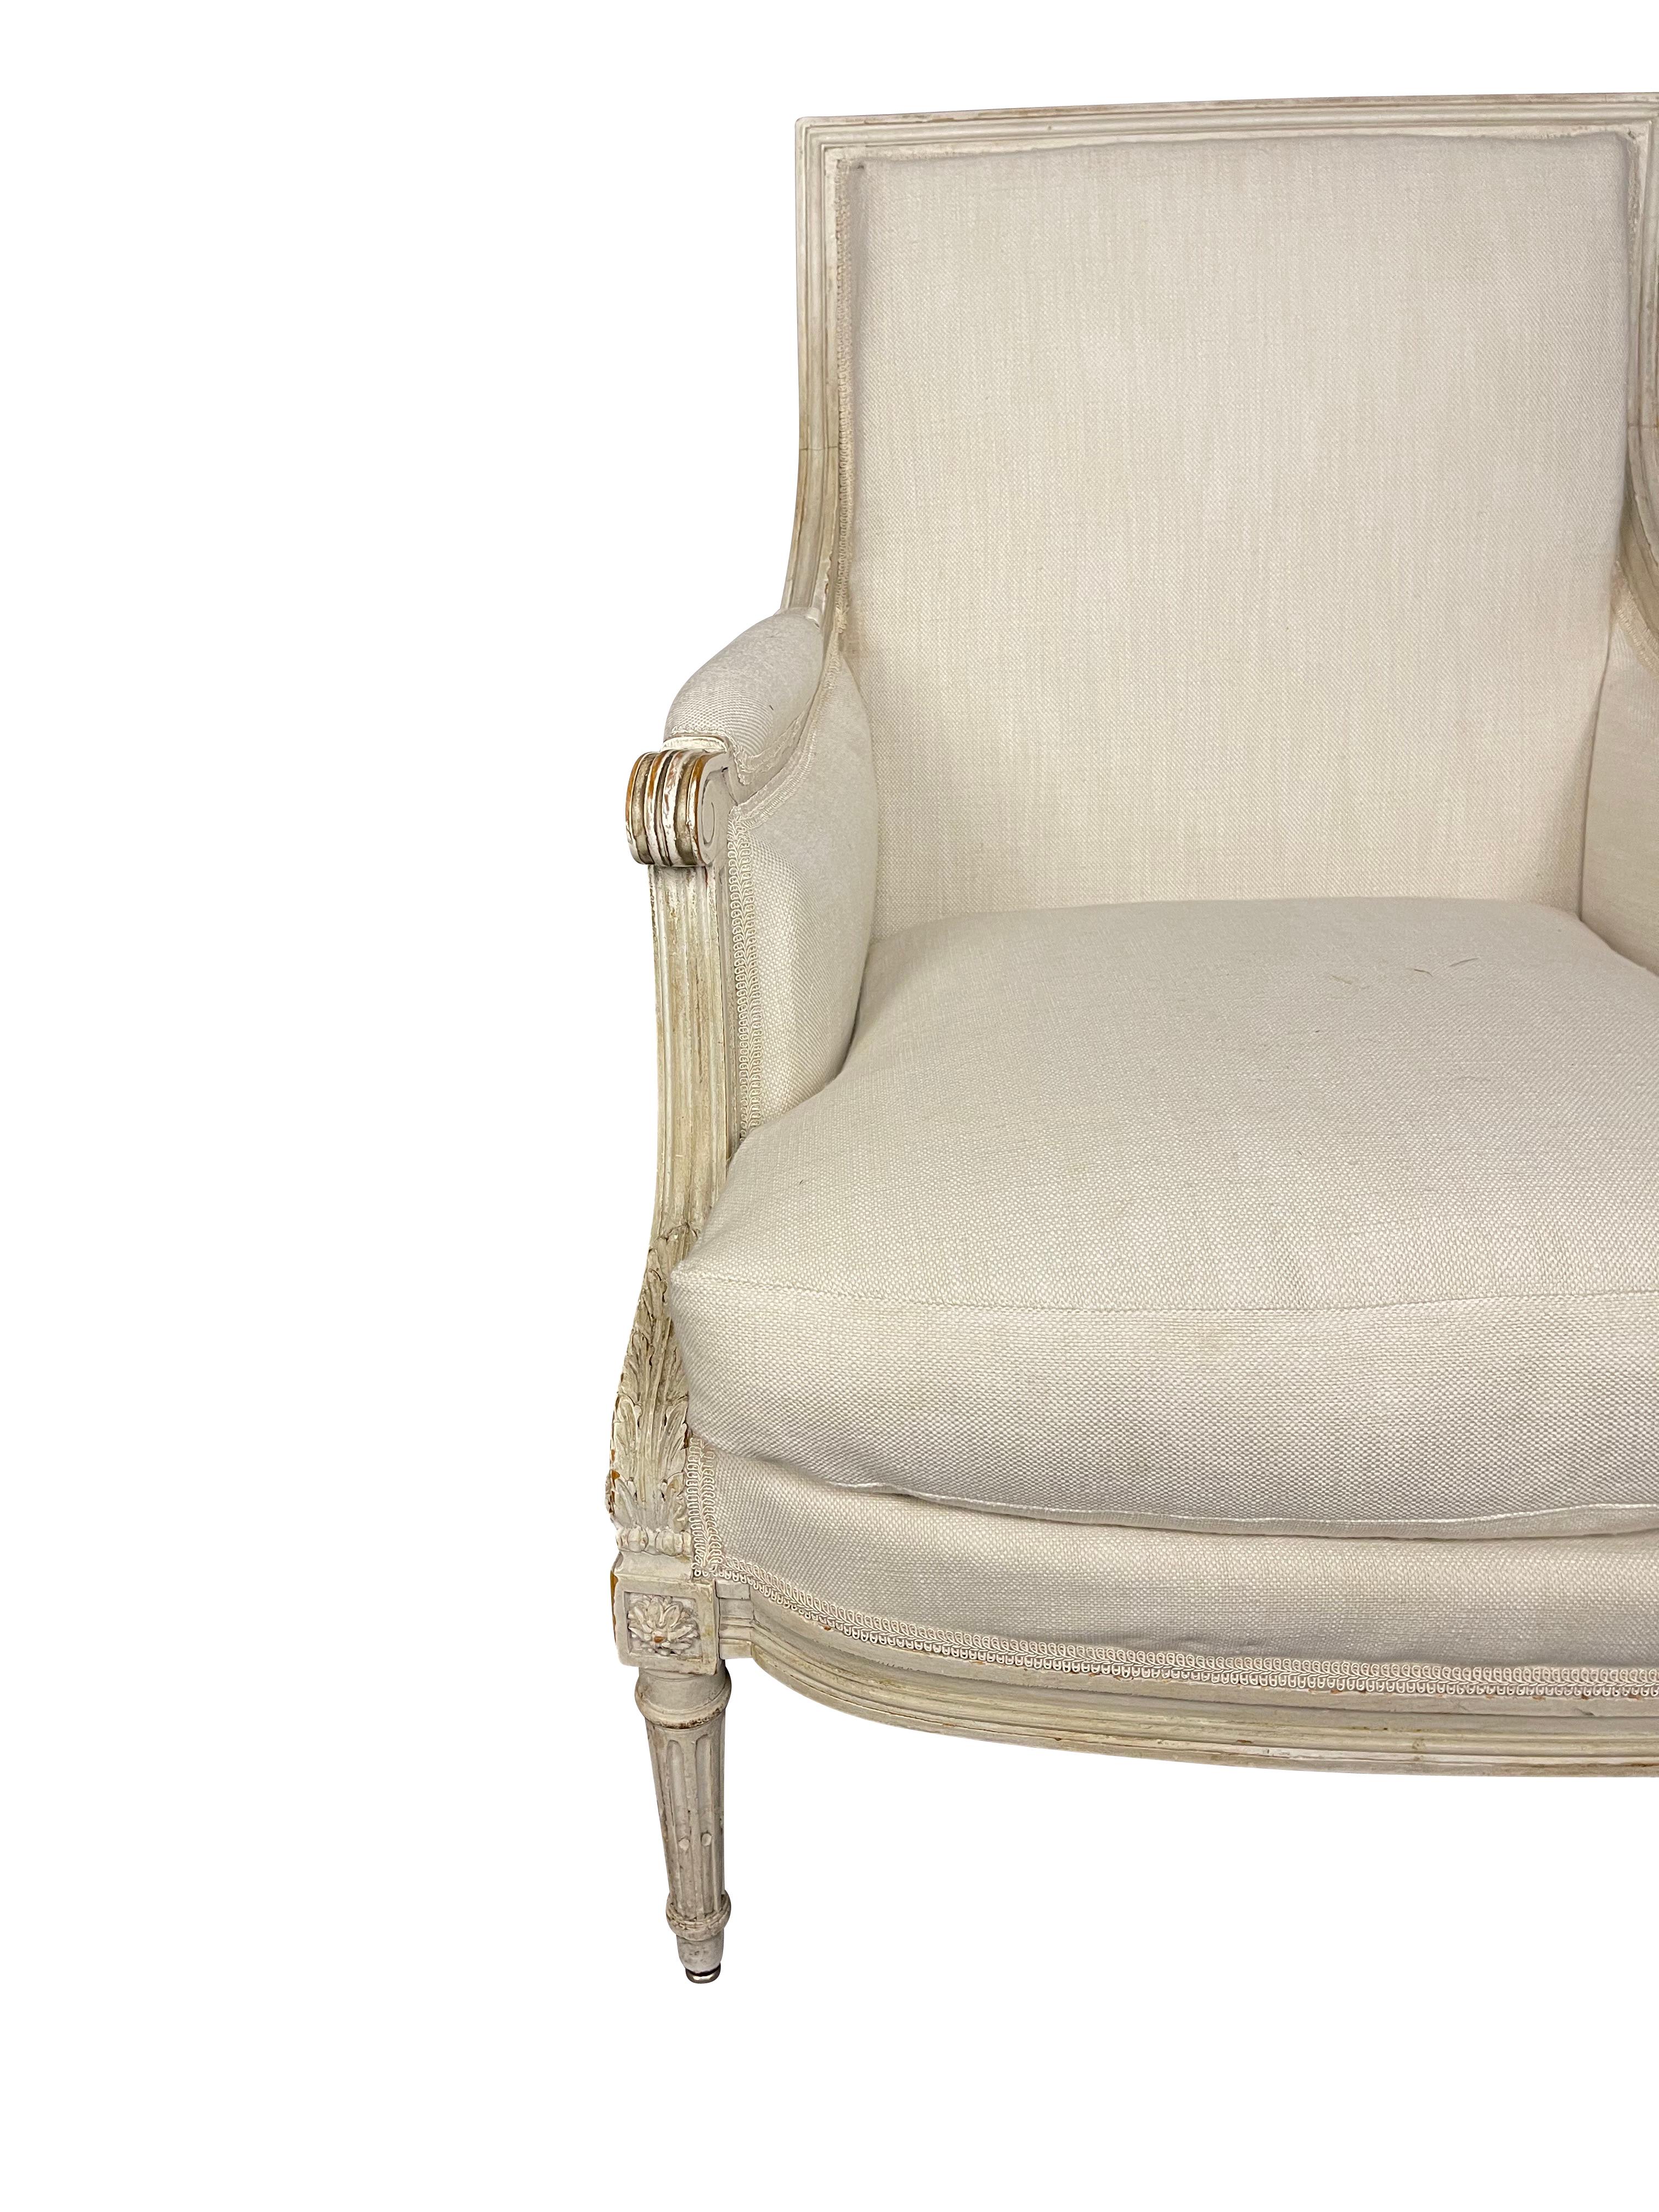 Hand-Carved Louis XVI Style Bergere Chair with Linen 